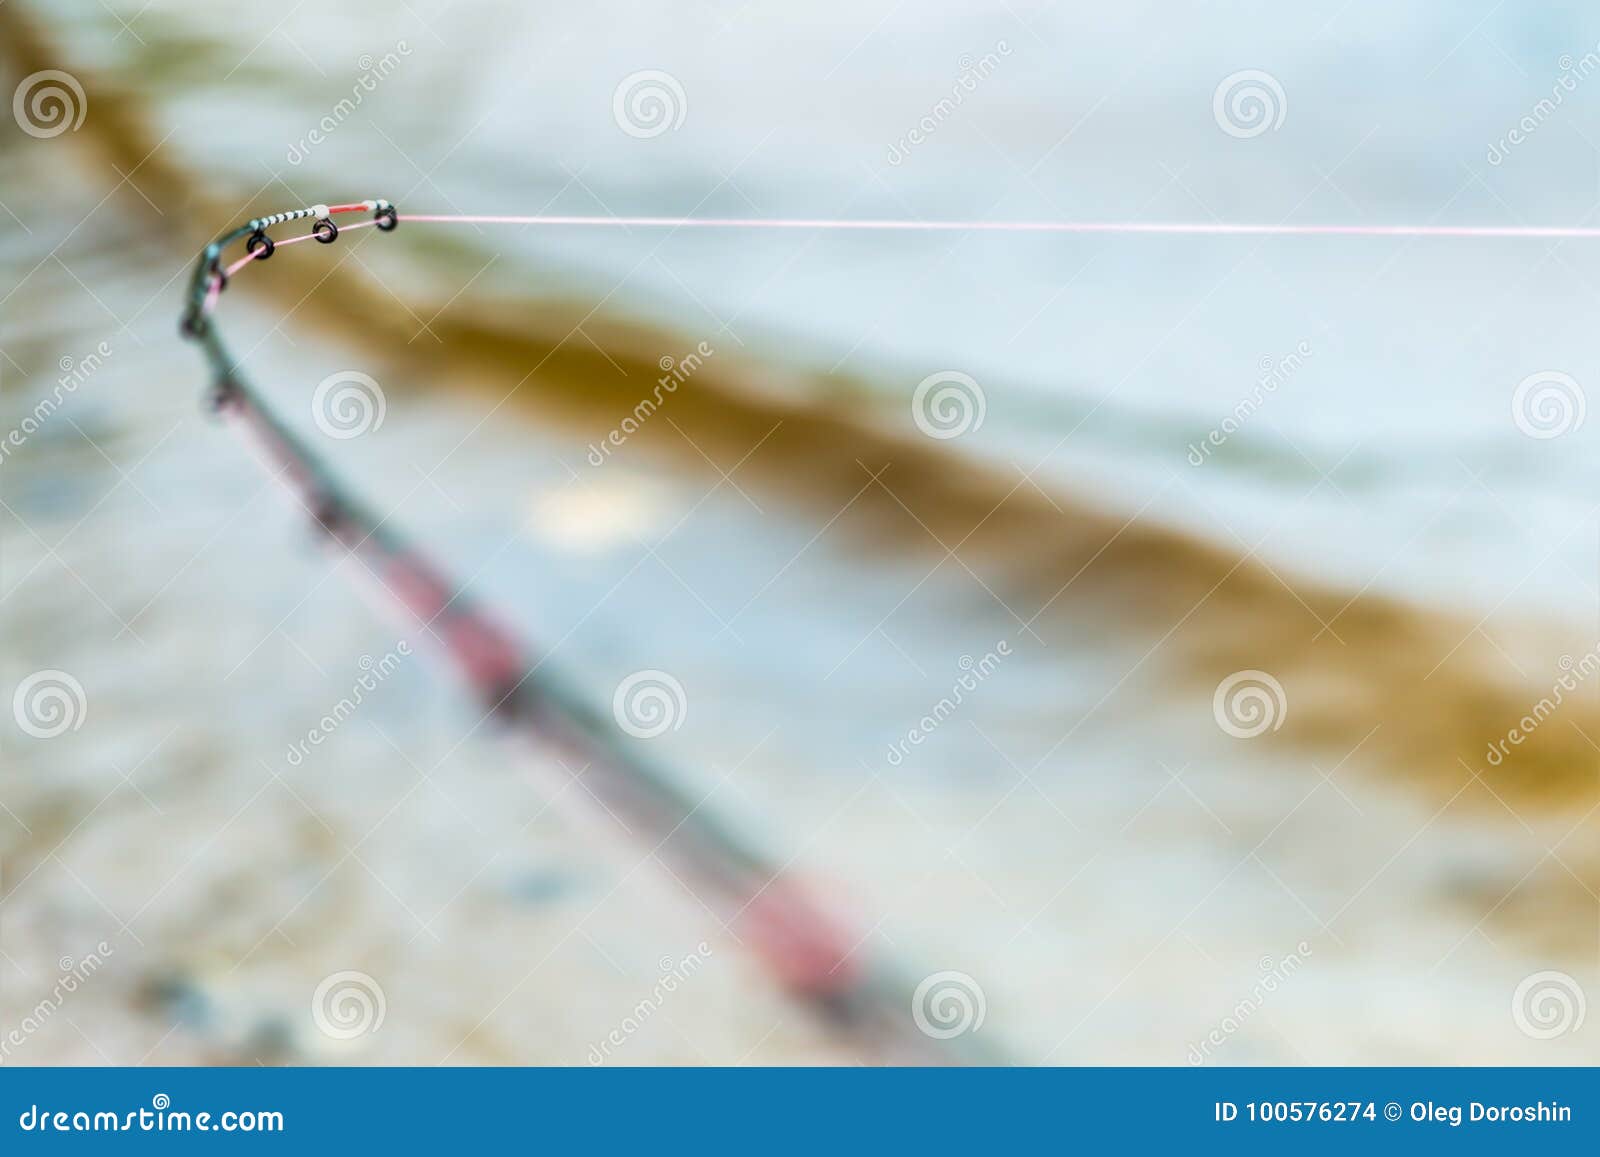 Fishing Feeder Rod with a Tight Line Indicates a Bite Stock Photo